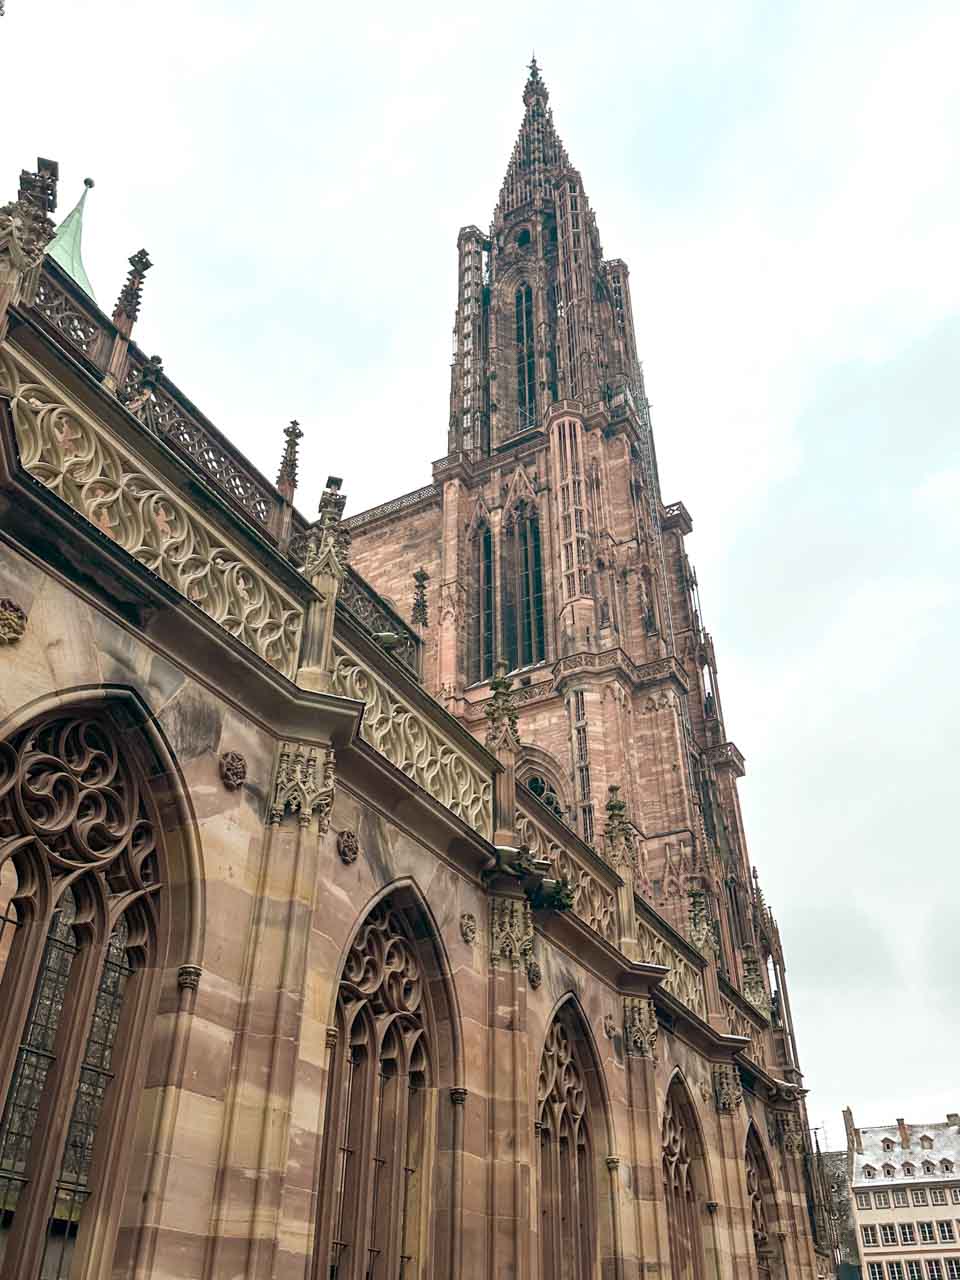 The towering spire of Strasbourg Cathedral